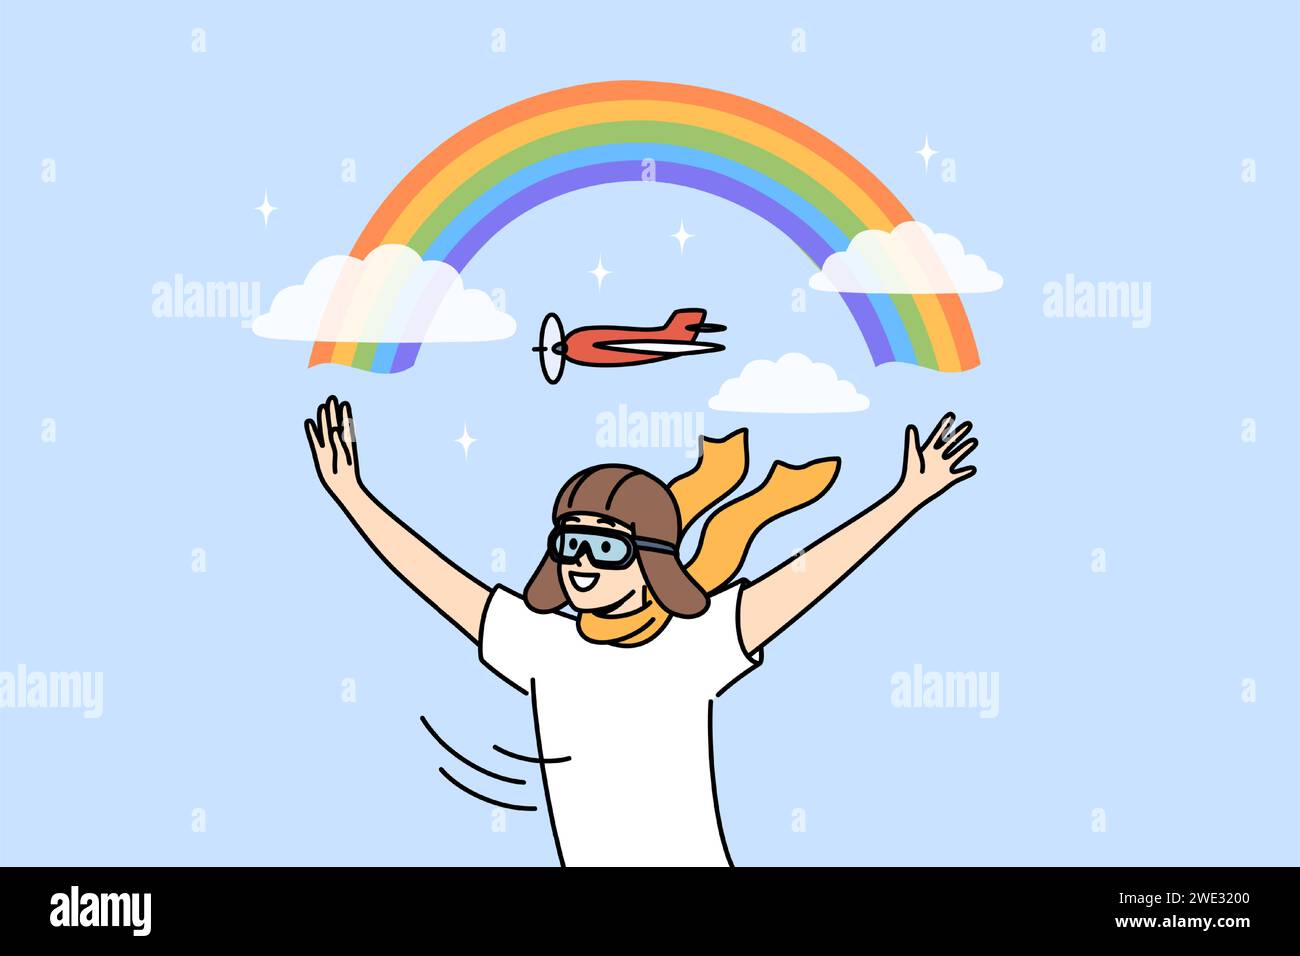 Boy in aviator hat dreams of becoming pilot and working as aviator, standing with hands spread out near rainbow in sky. Child pilot enjoys fantasies about future career in airline industry. Stock Vector